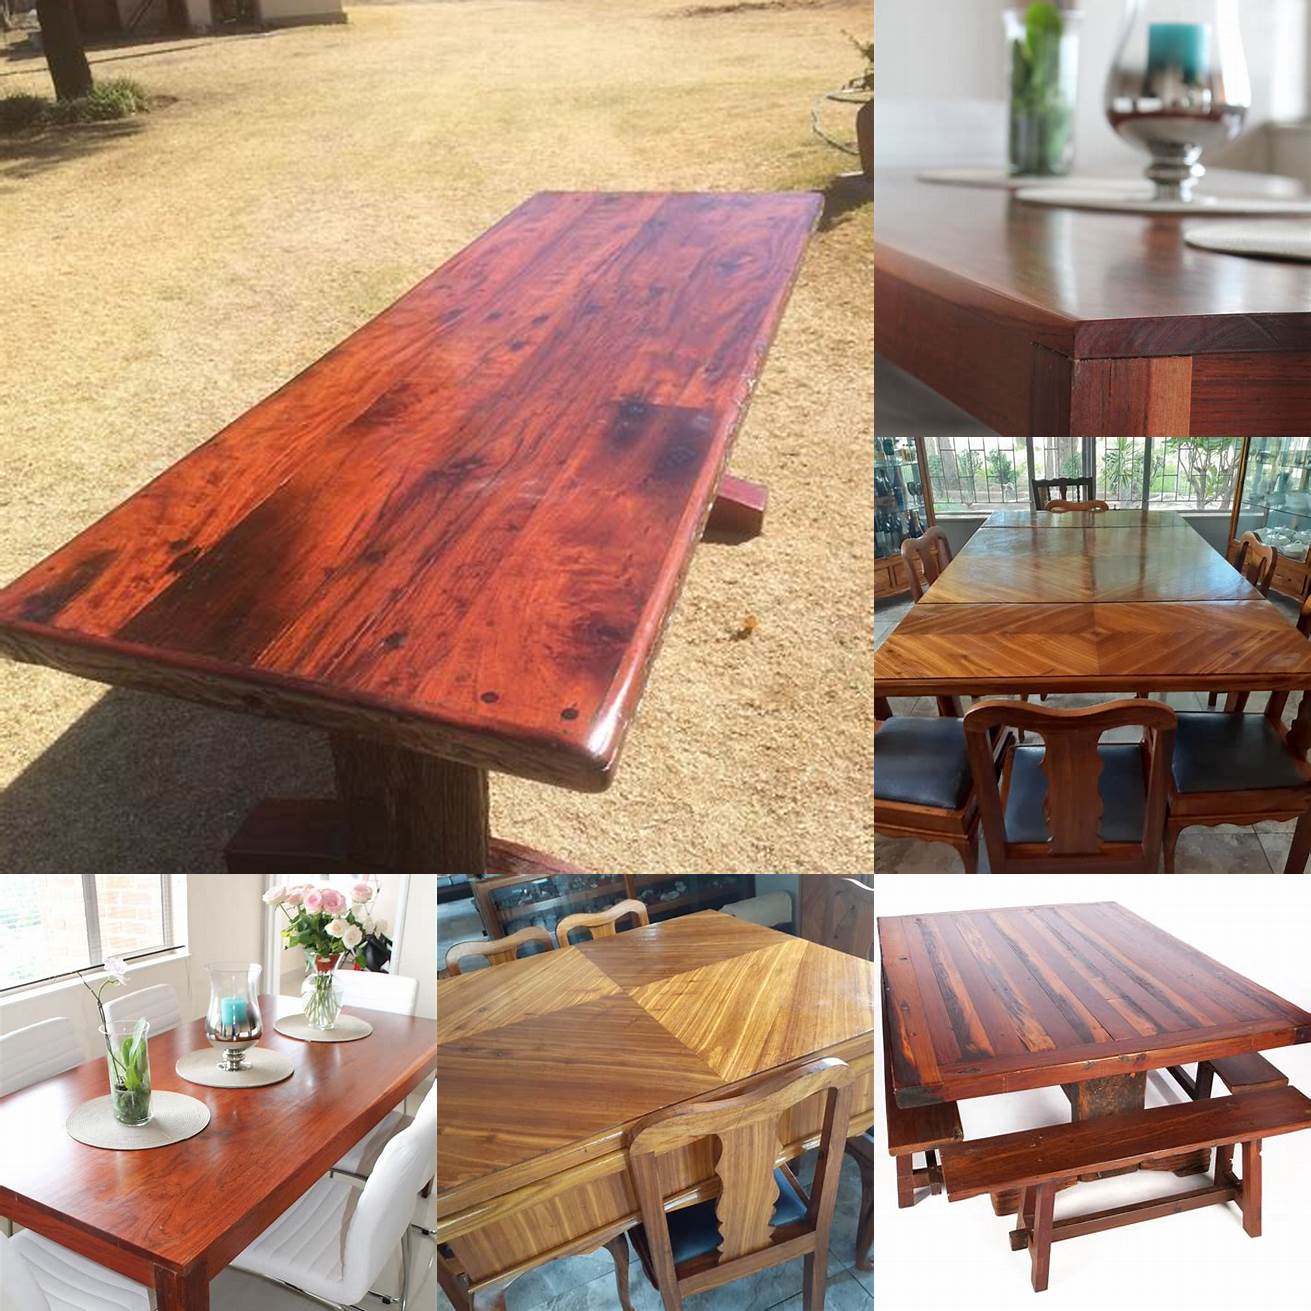 A dining table made of Rhodesian teak